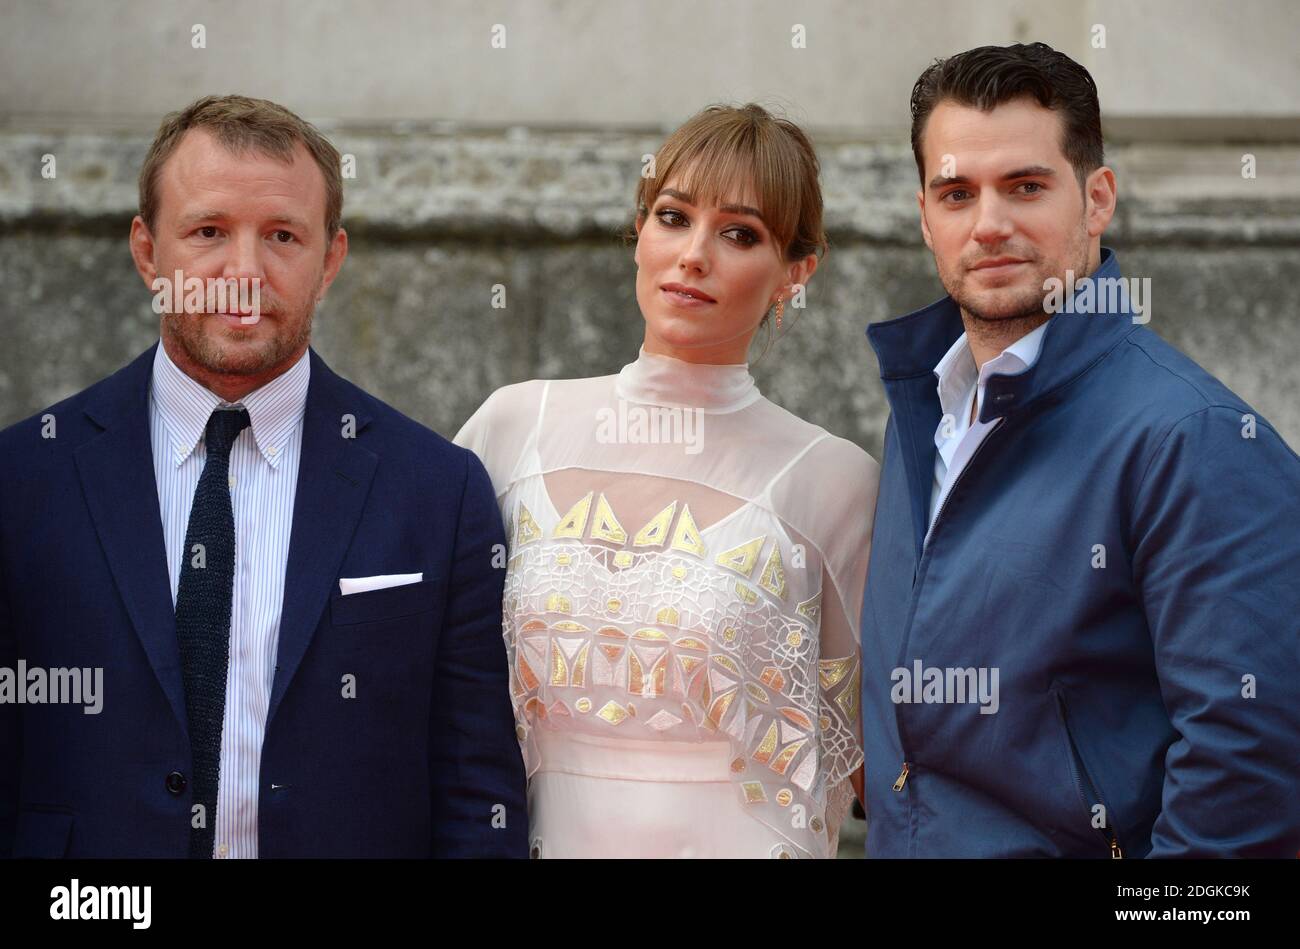 Henry Cavill, Guy Ritchie and wife Jacqui Ainsley arriving at The